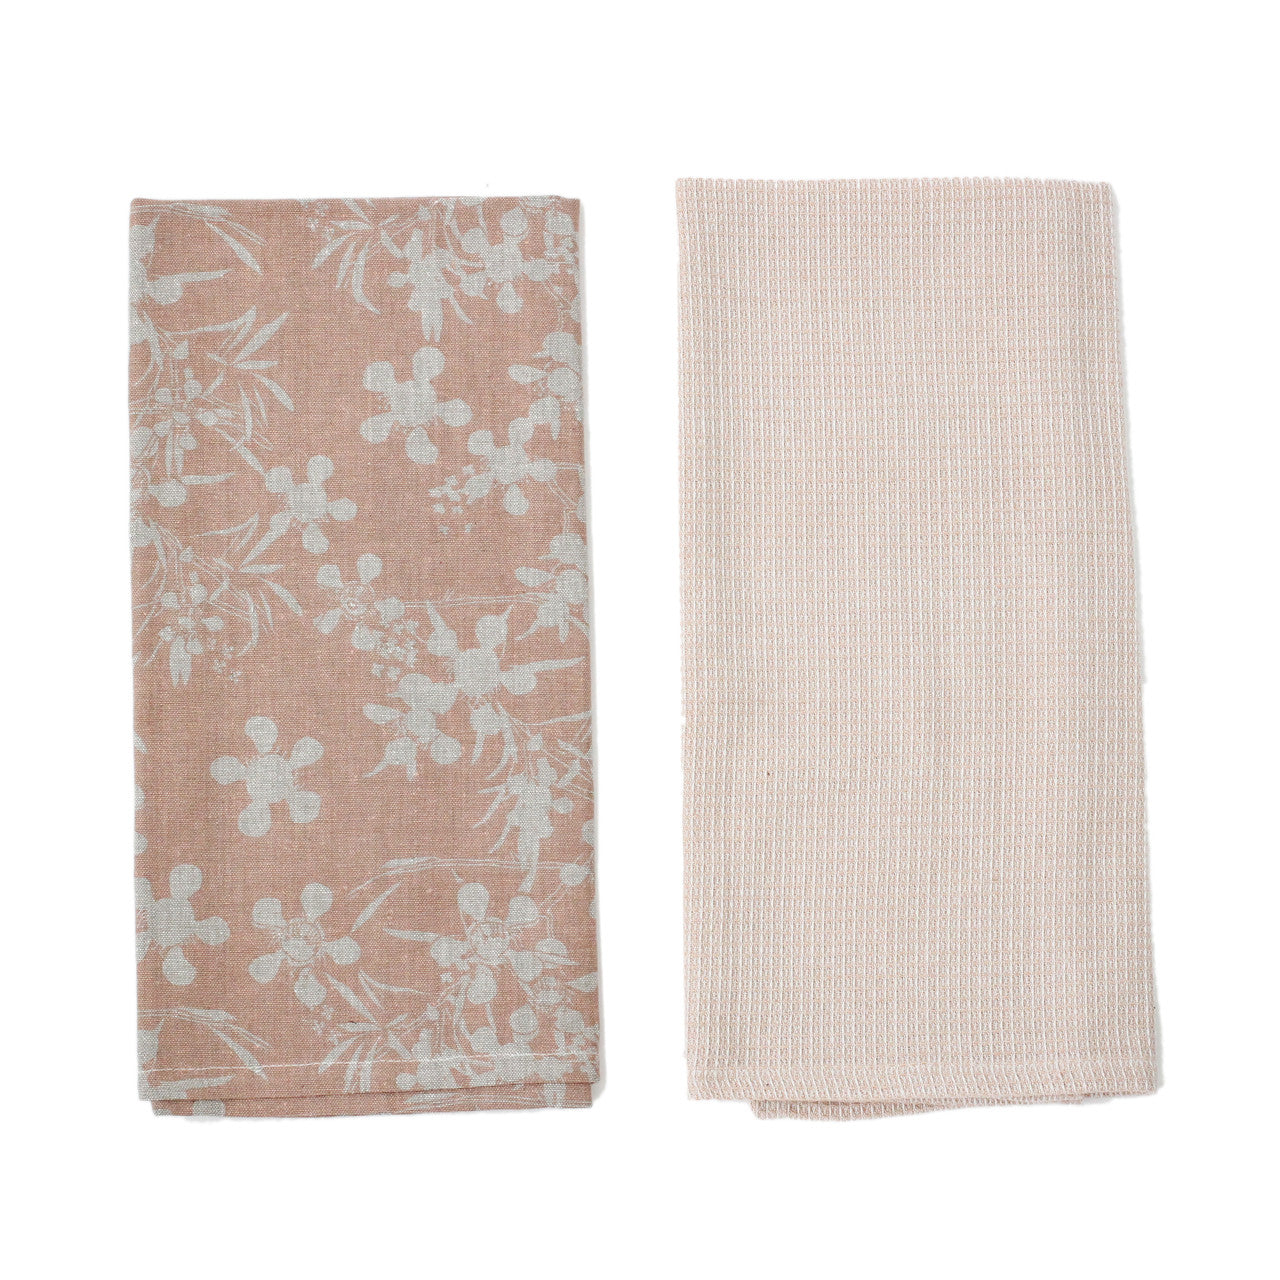 2 clay colored dishtowels folded on a white background.